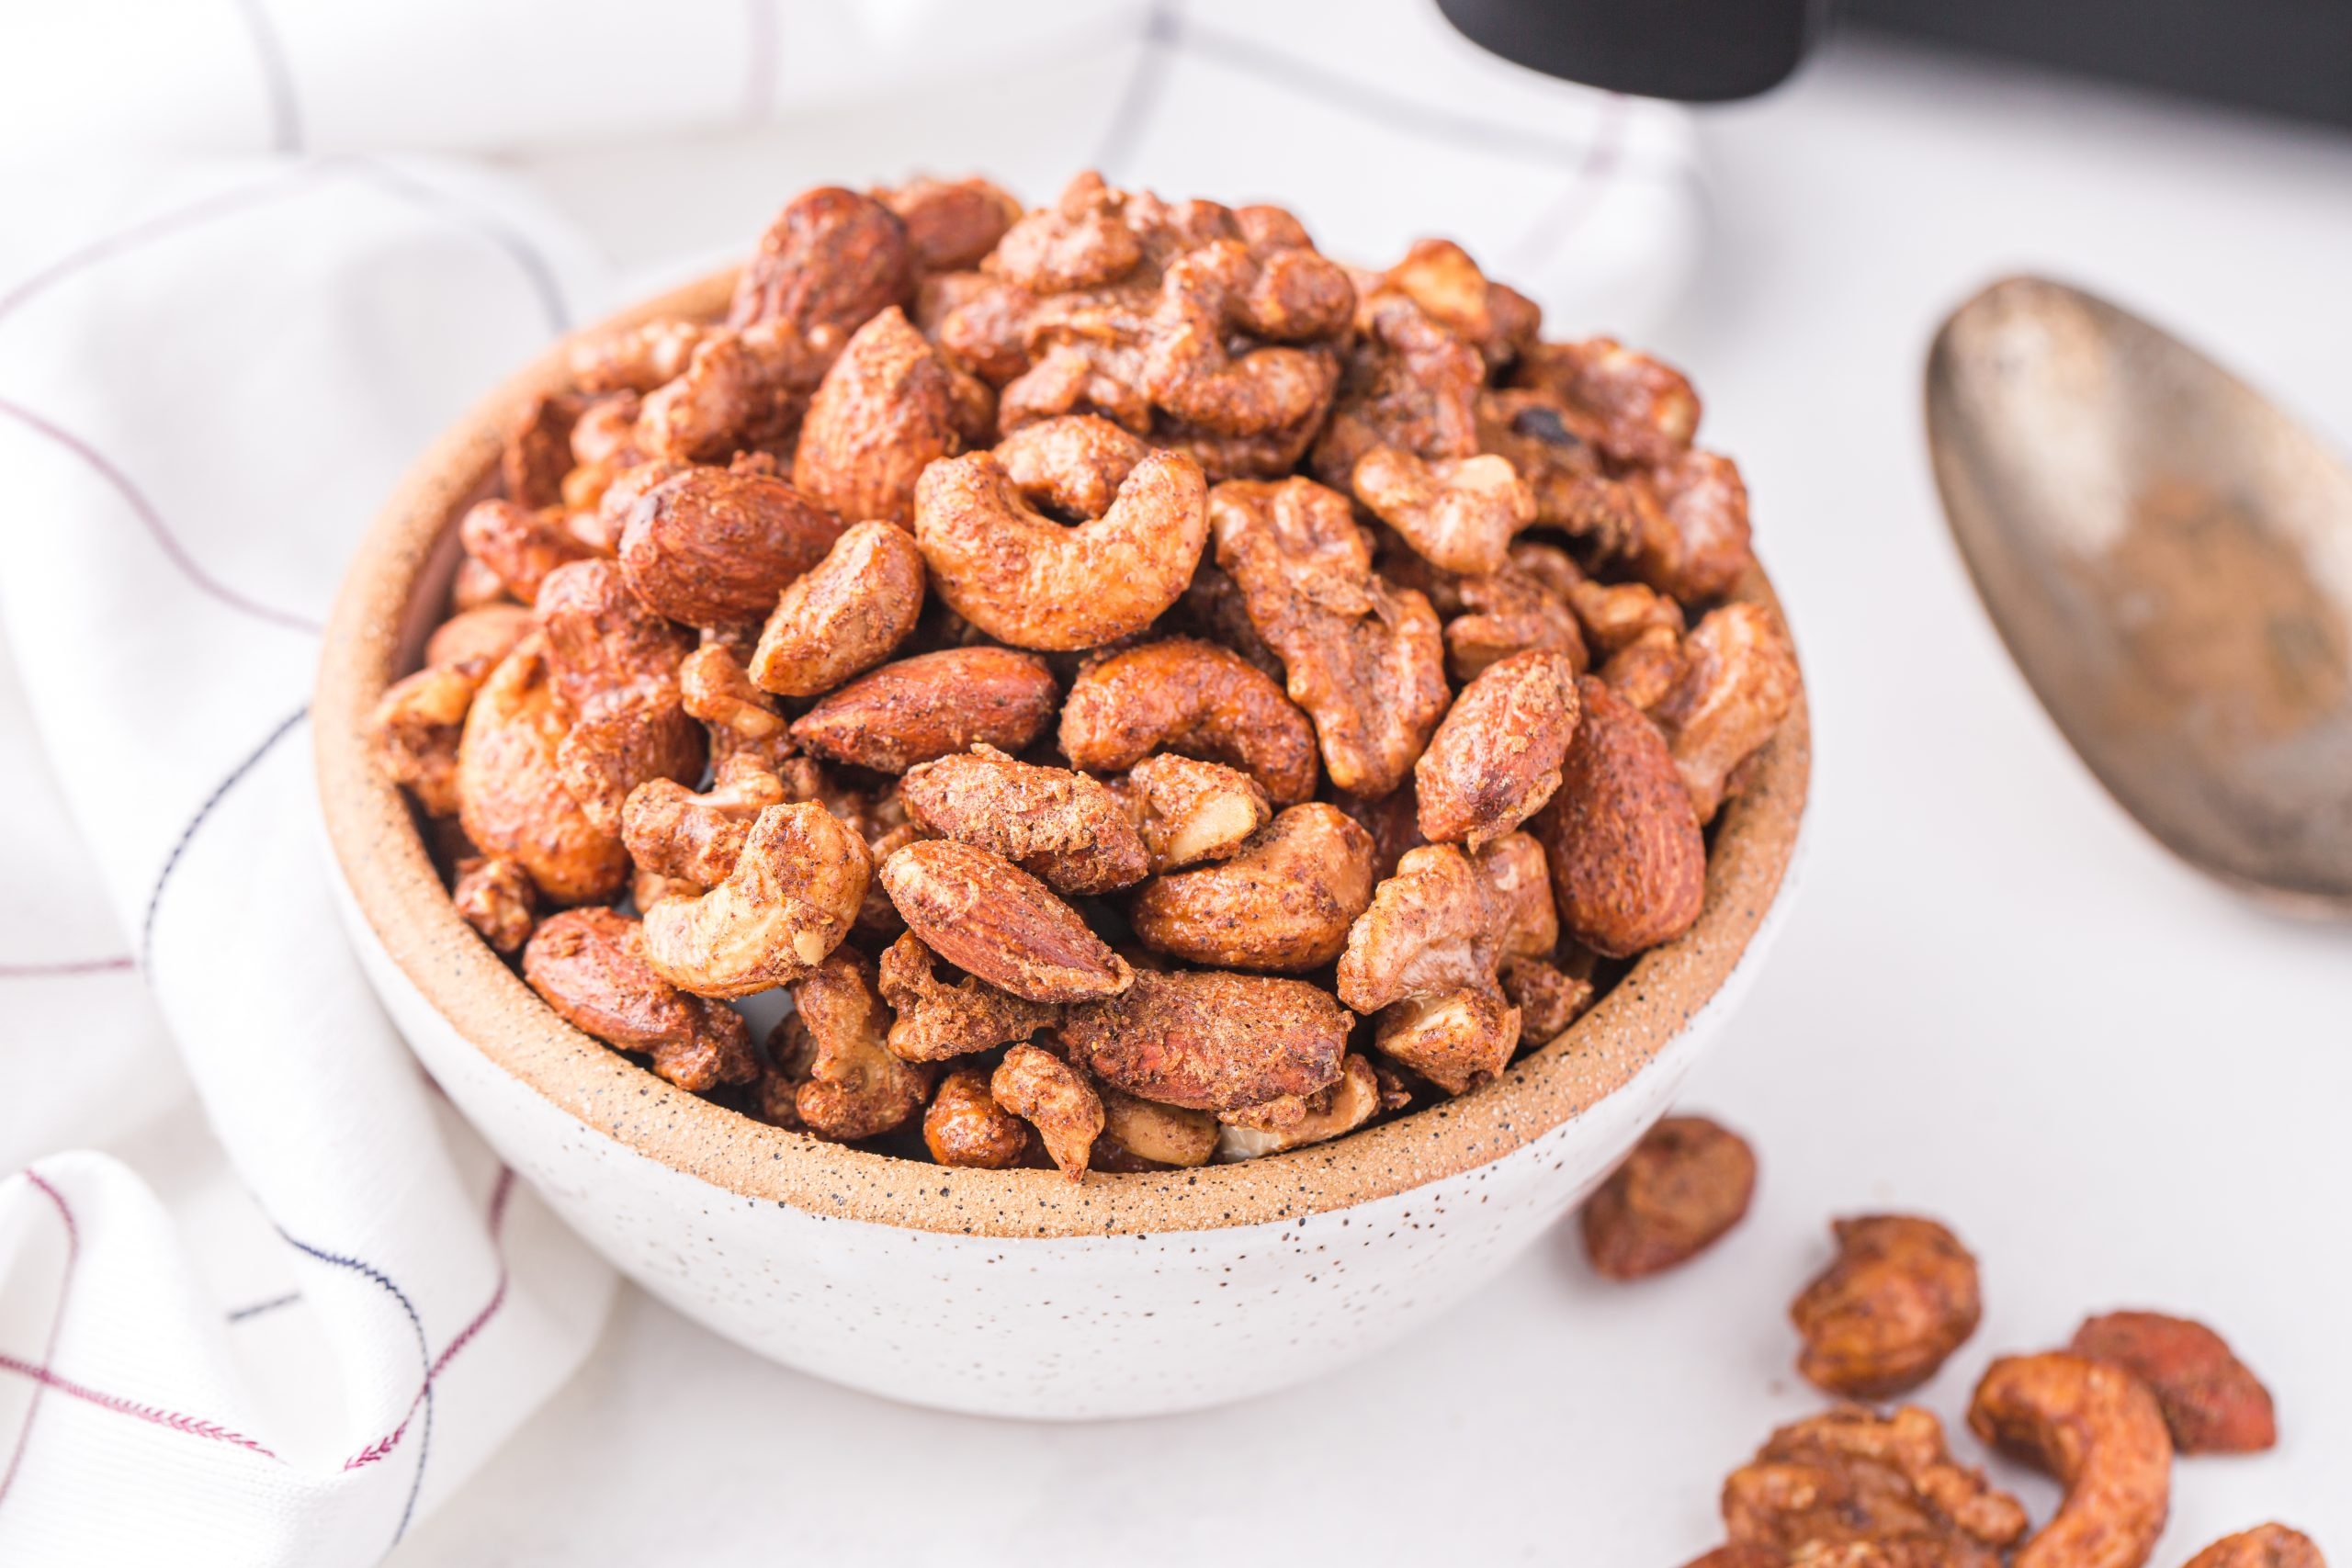 Nuts: Contain unsaturated fatty acids and other nutrients, Healthy food. 2560x1710 HD Wallpaper.